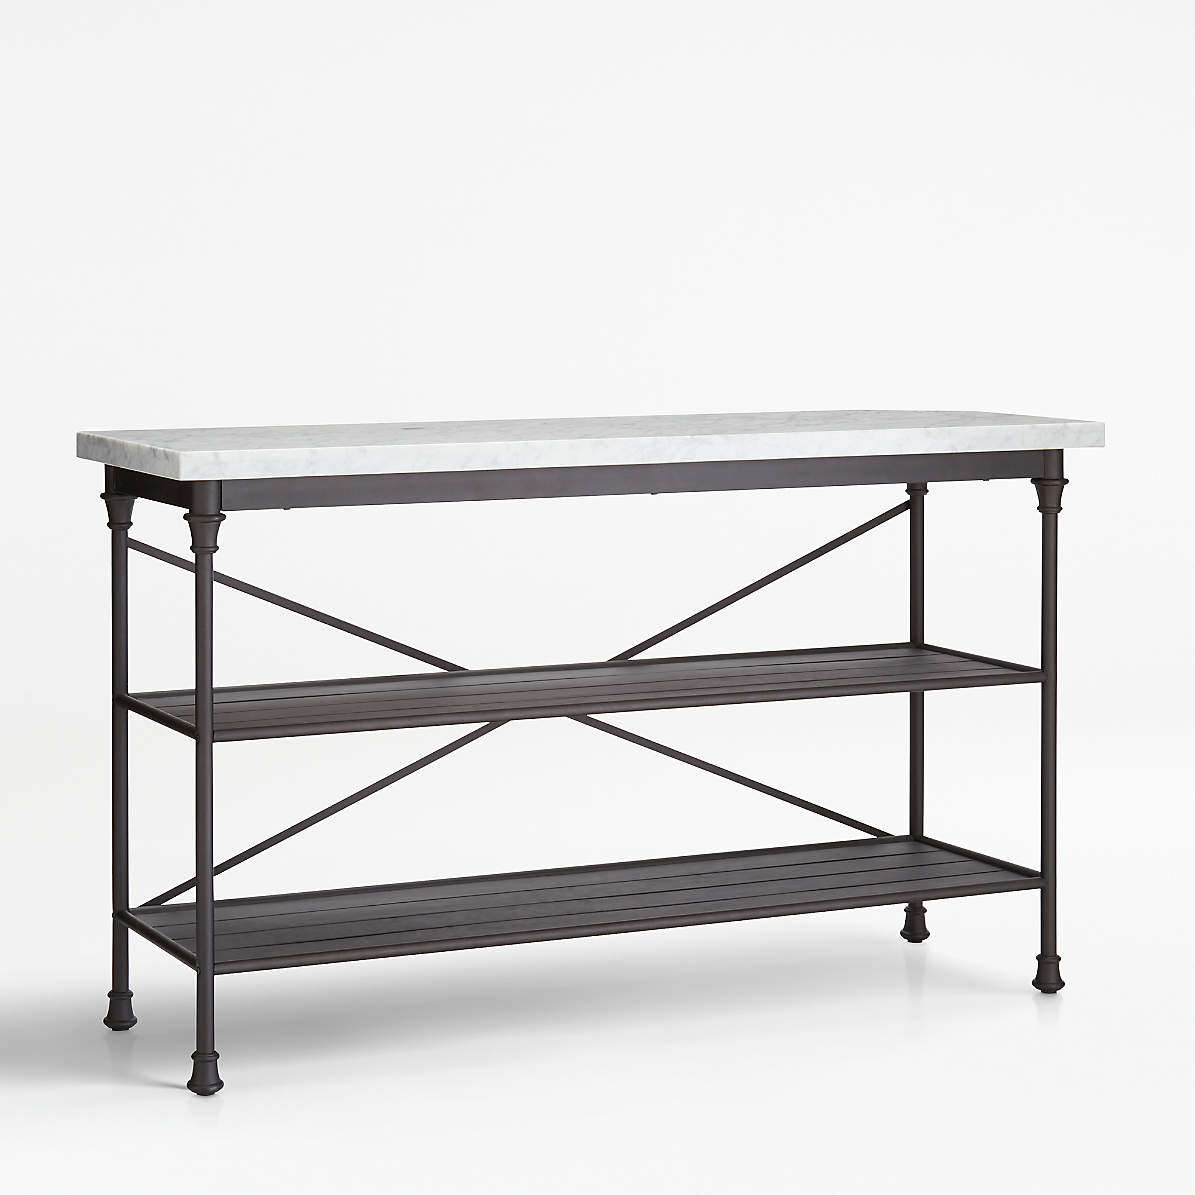 French Kitchen Bakers Rack Reviews Crate And Barrel